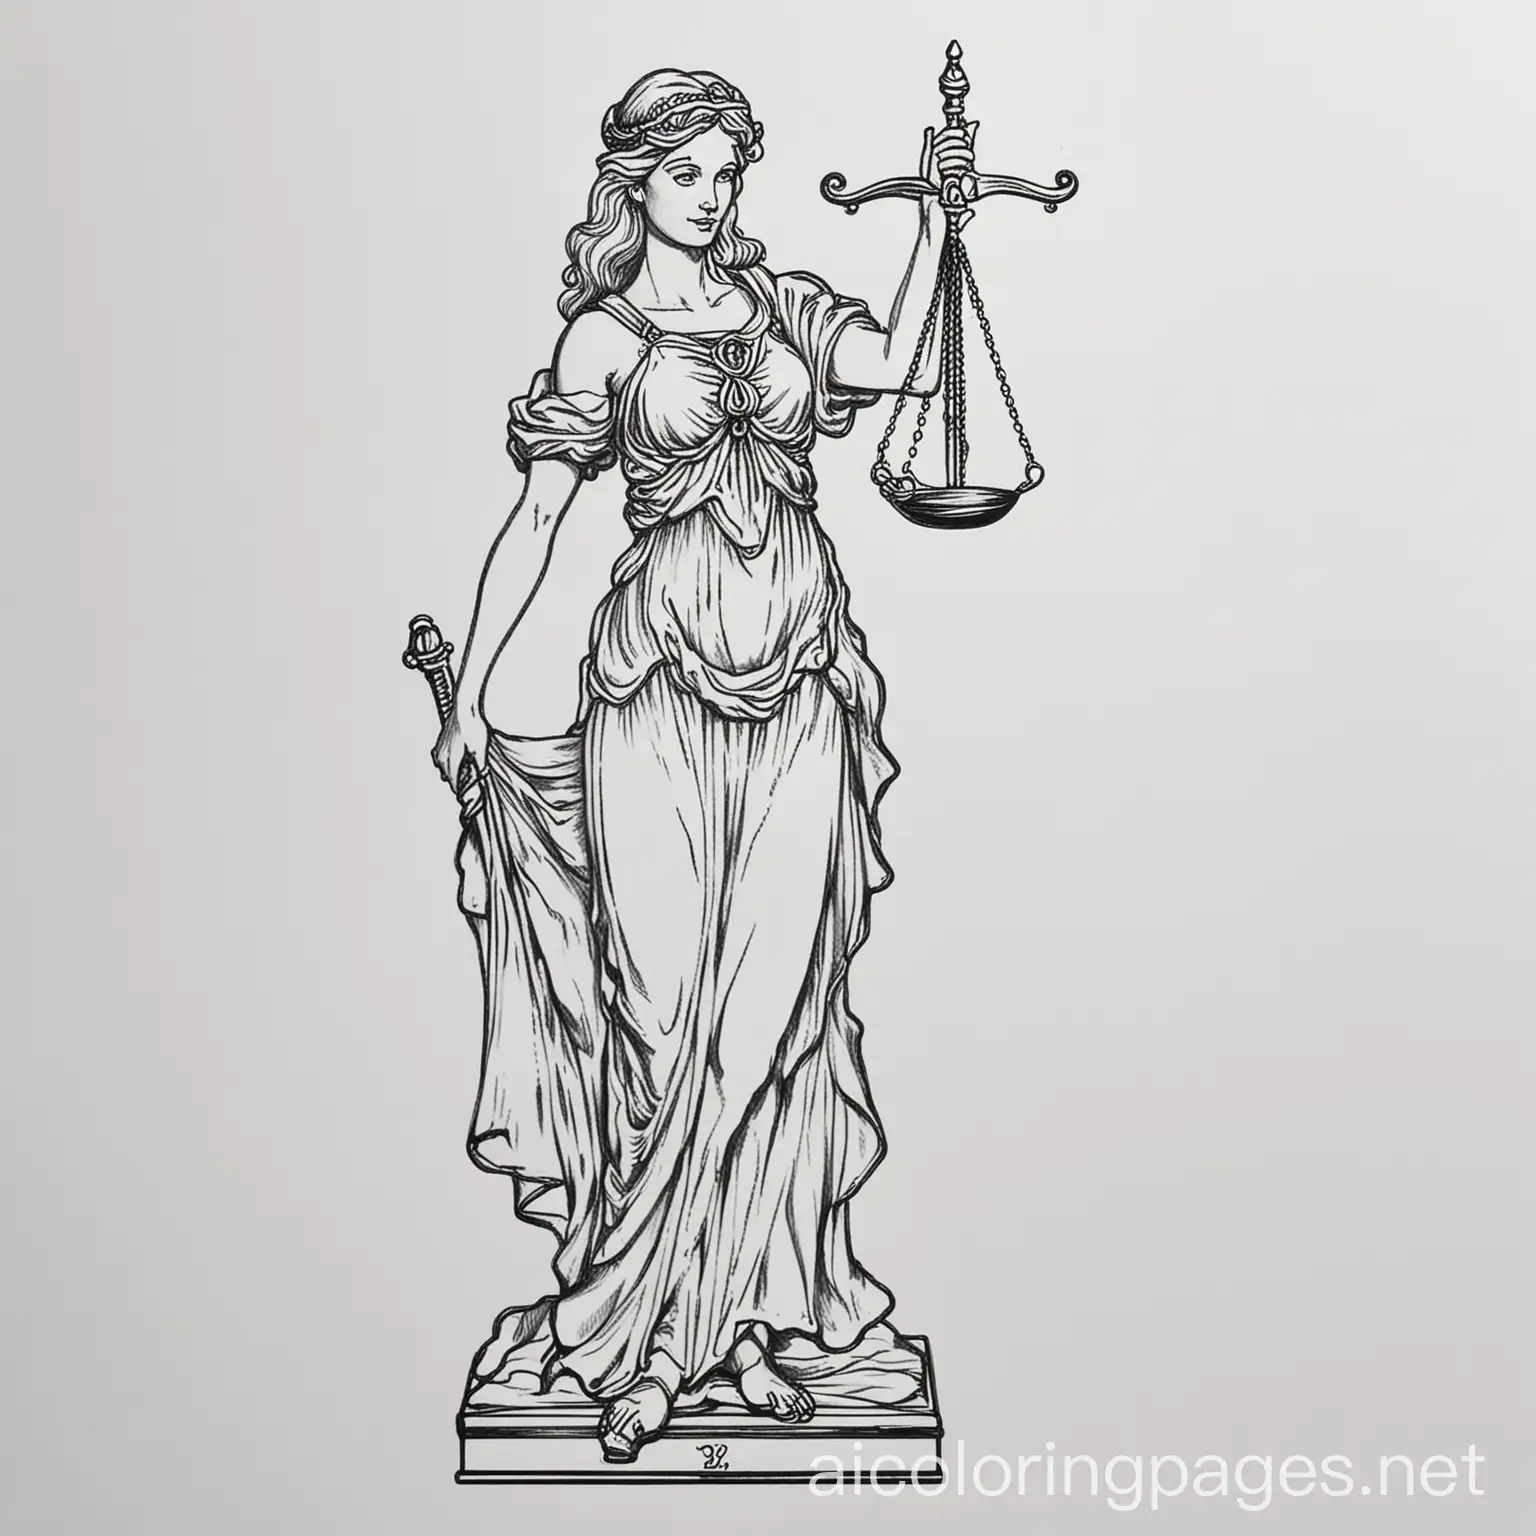 Lady-Justice-Coloring-Page-Black-and-White-Line-Art-for-Simplicity-and-Easy-Coloring